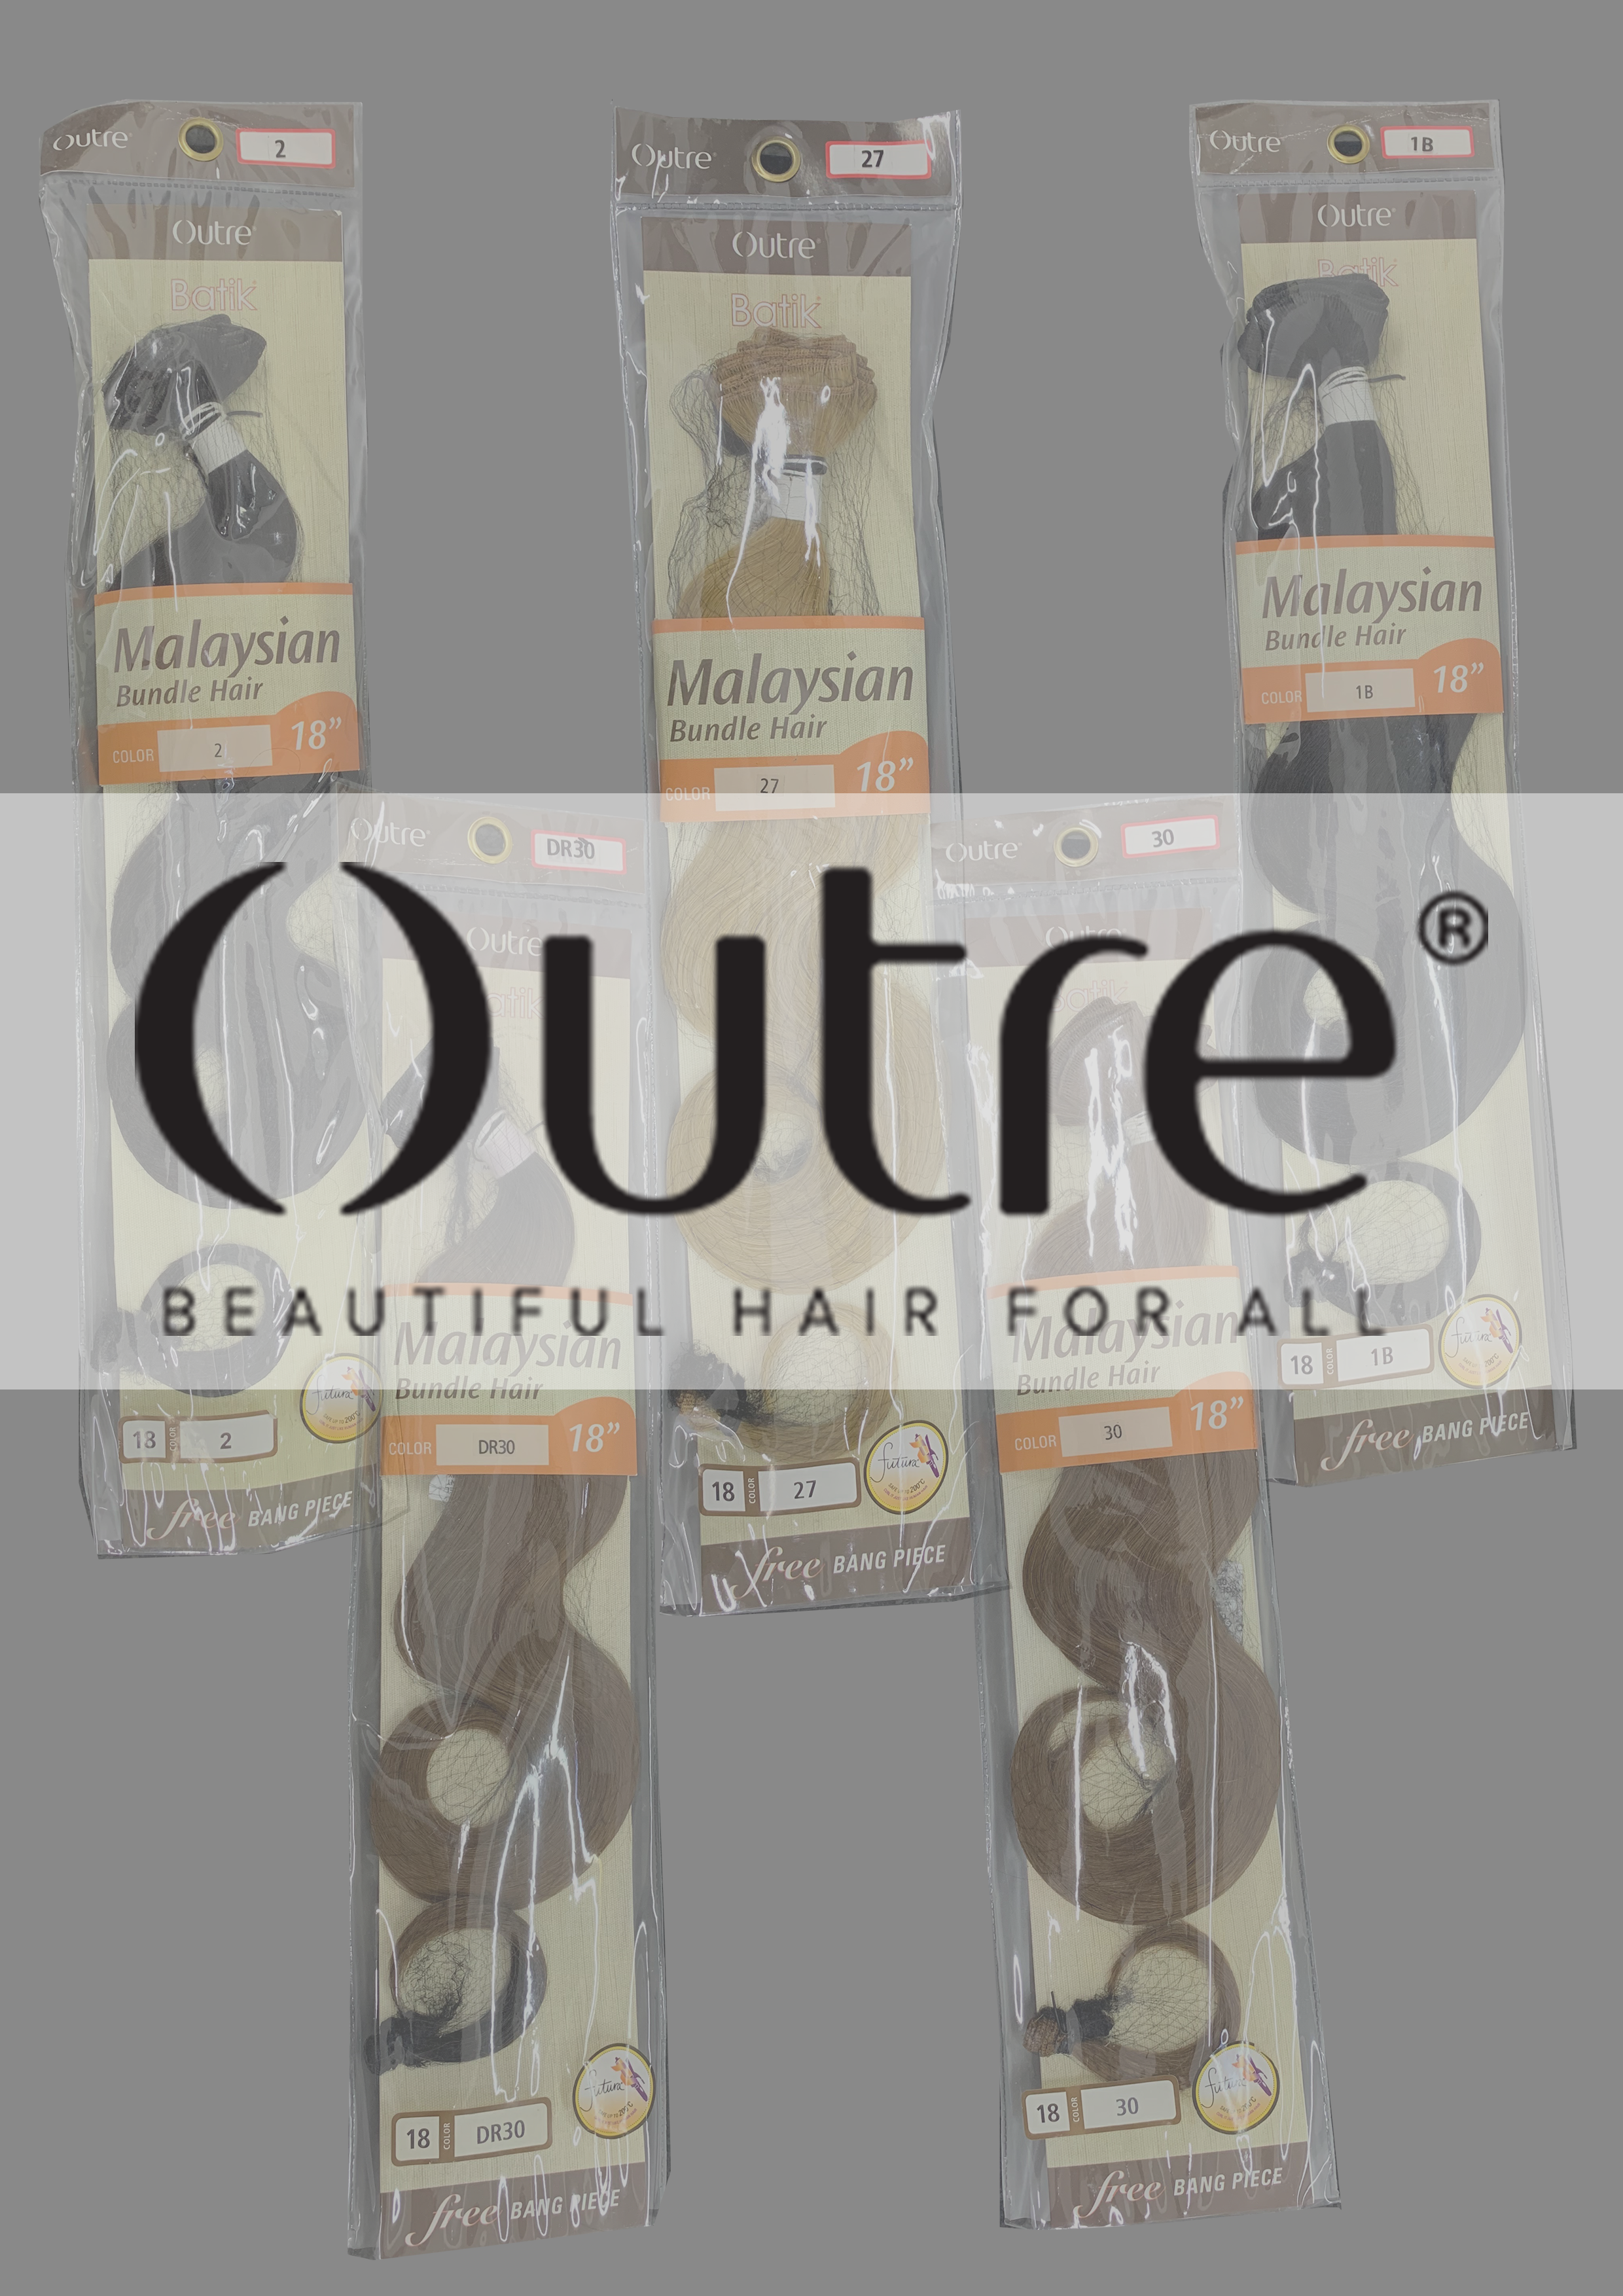 Malaysian Bundle Hair Packs by Outre